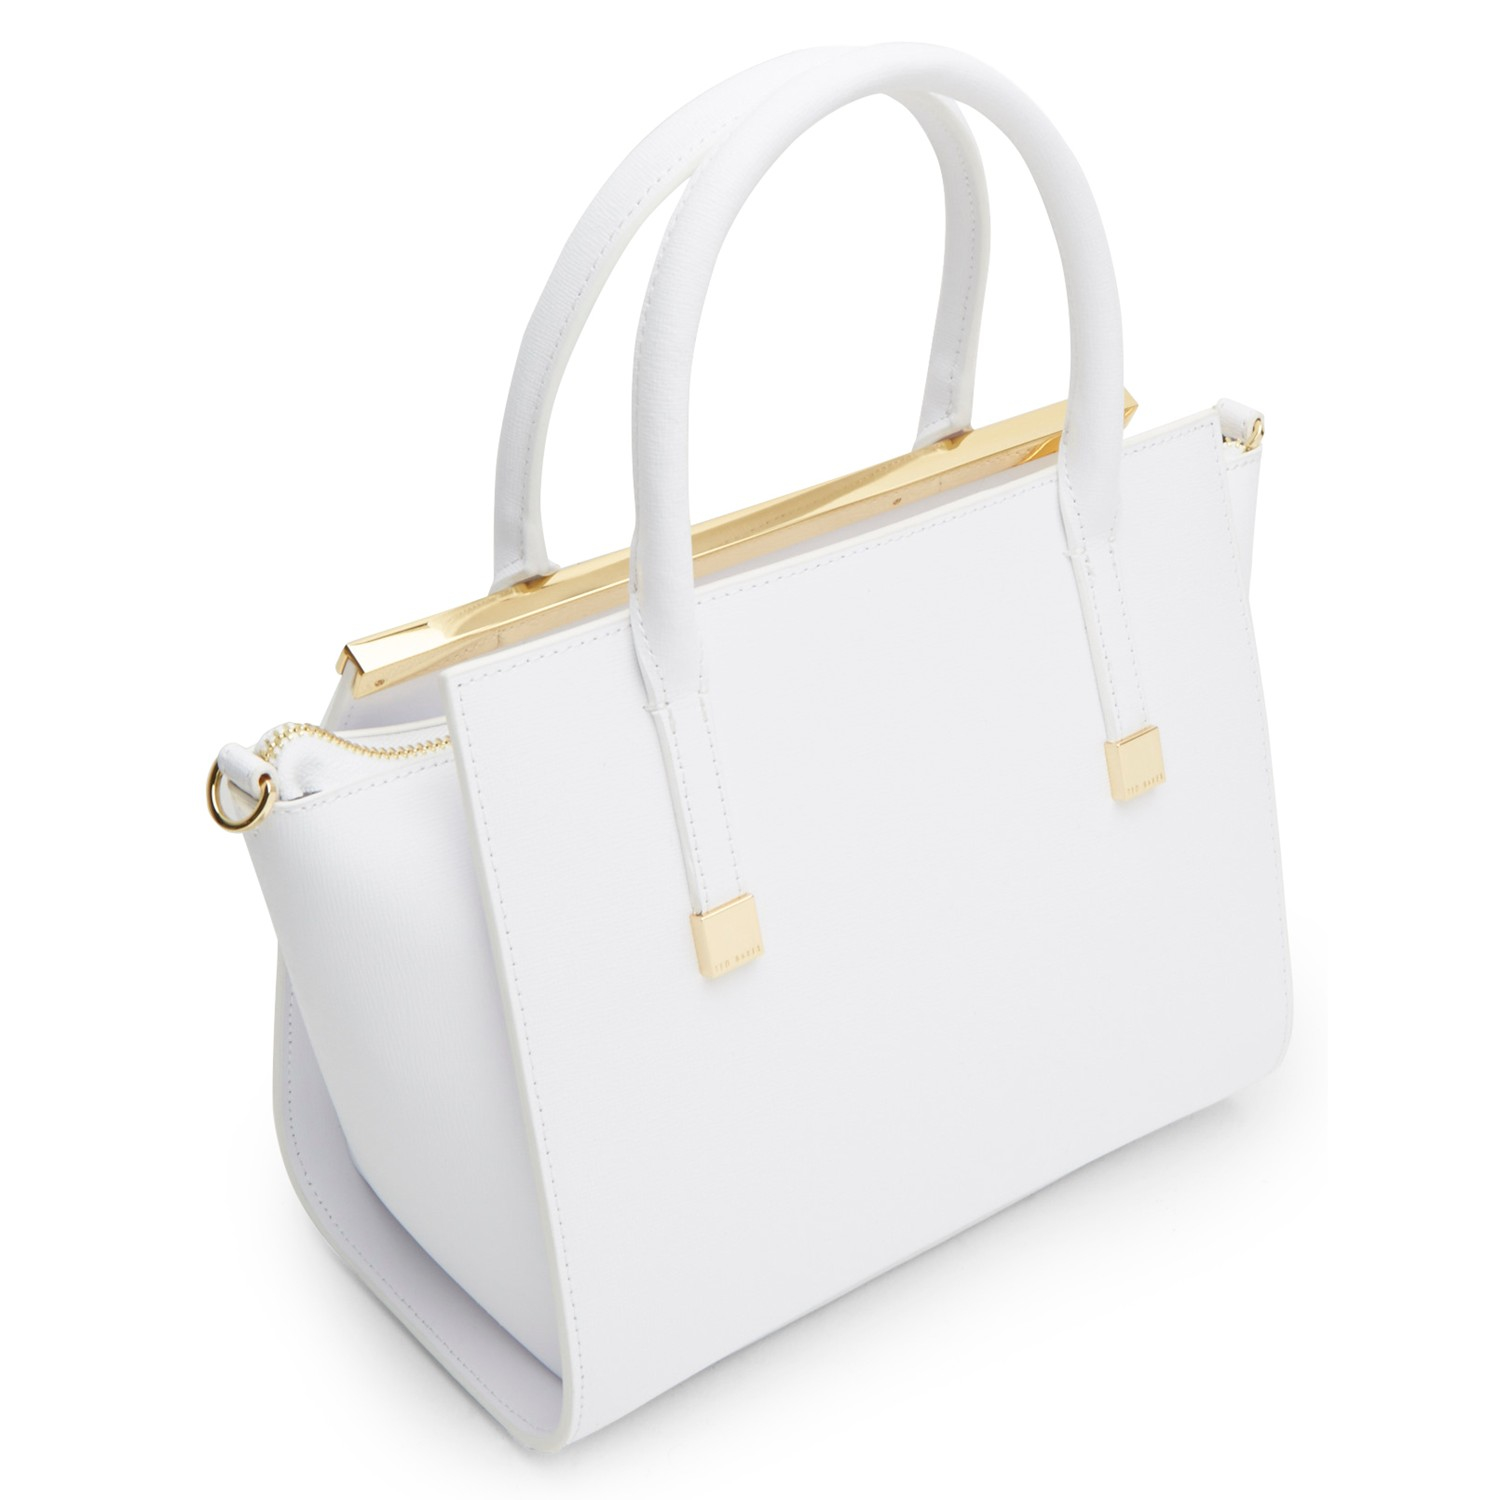 Ted Baker Trudy Leather Tote Bag in White - Lyst